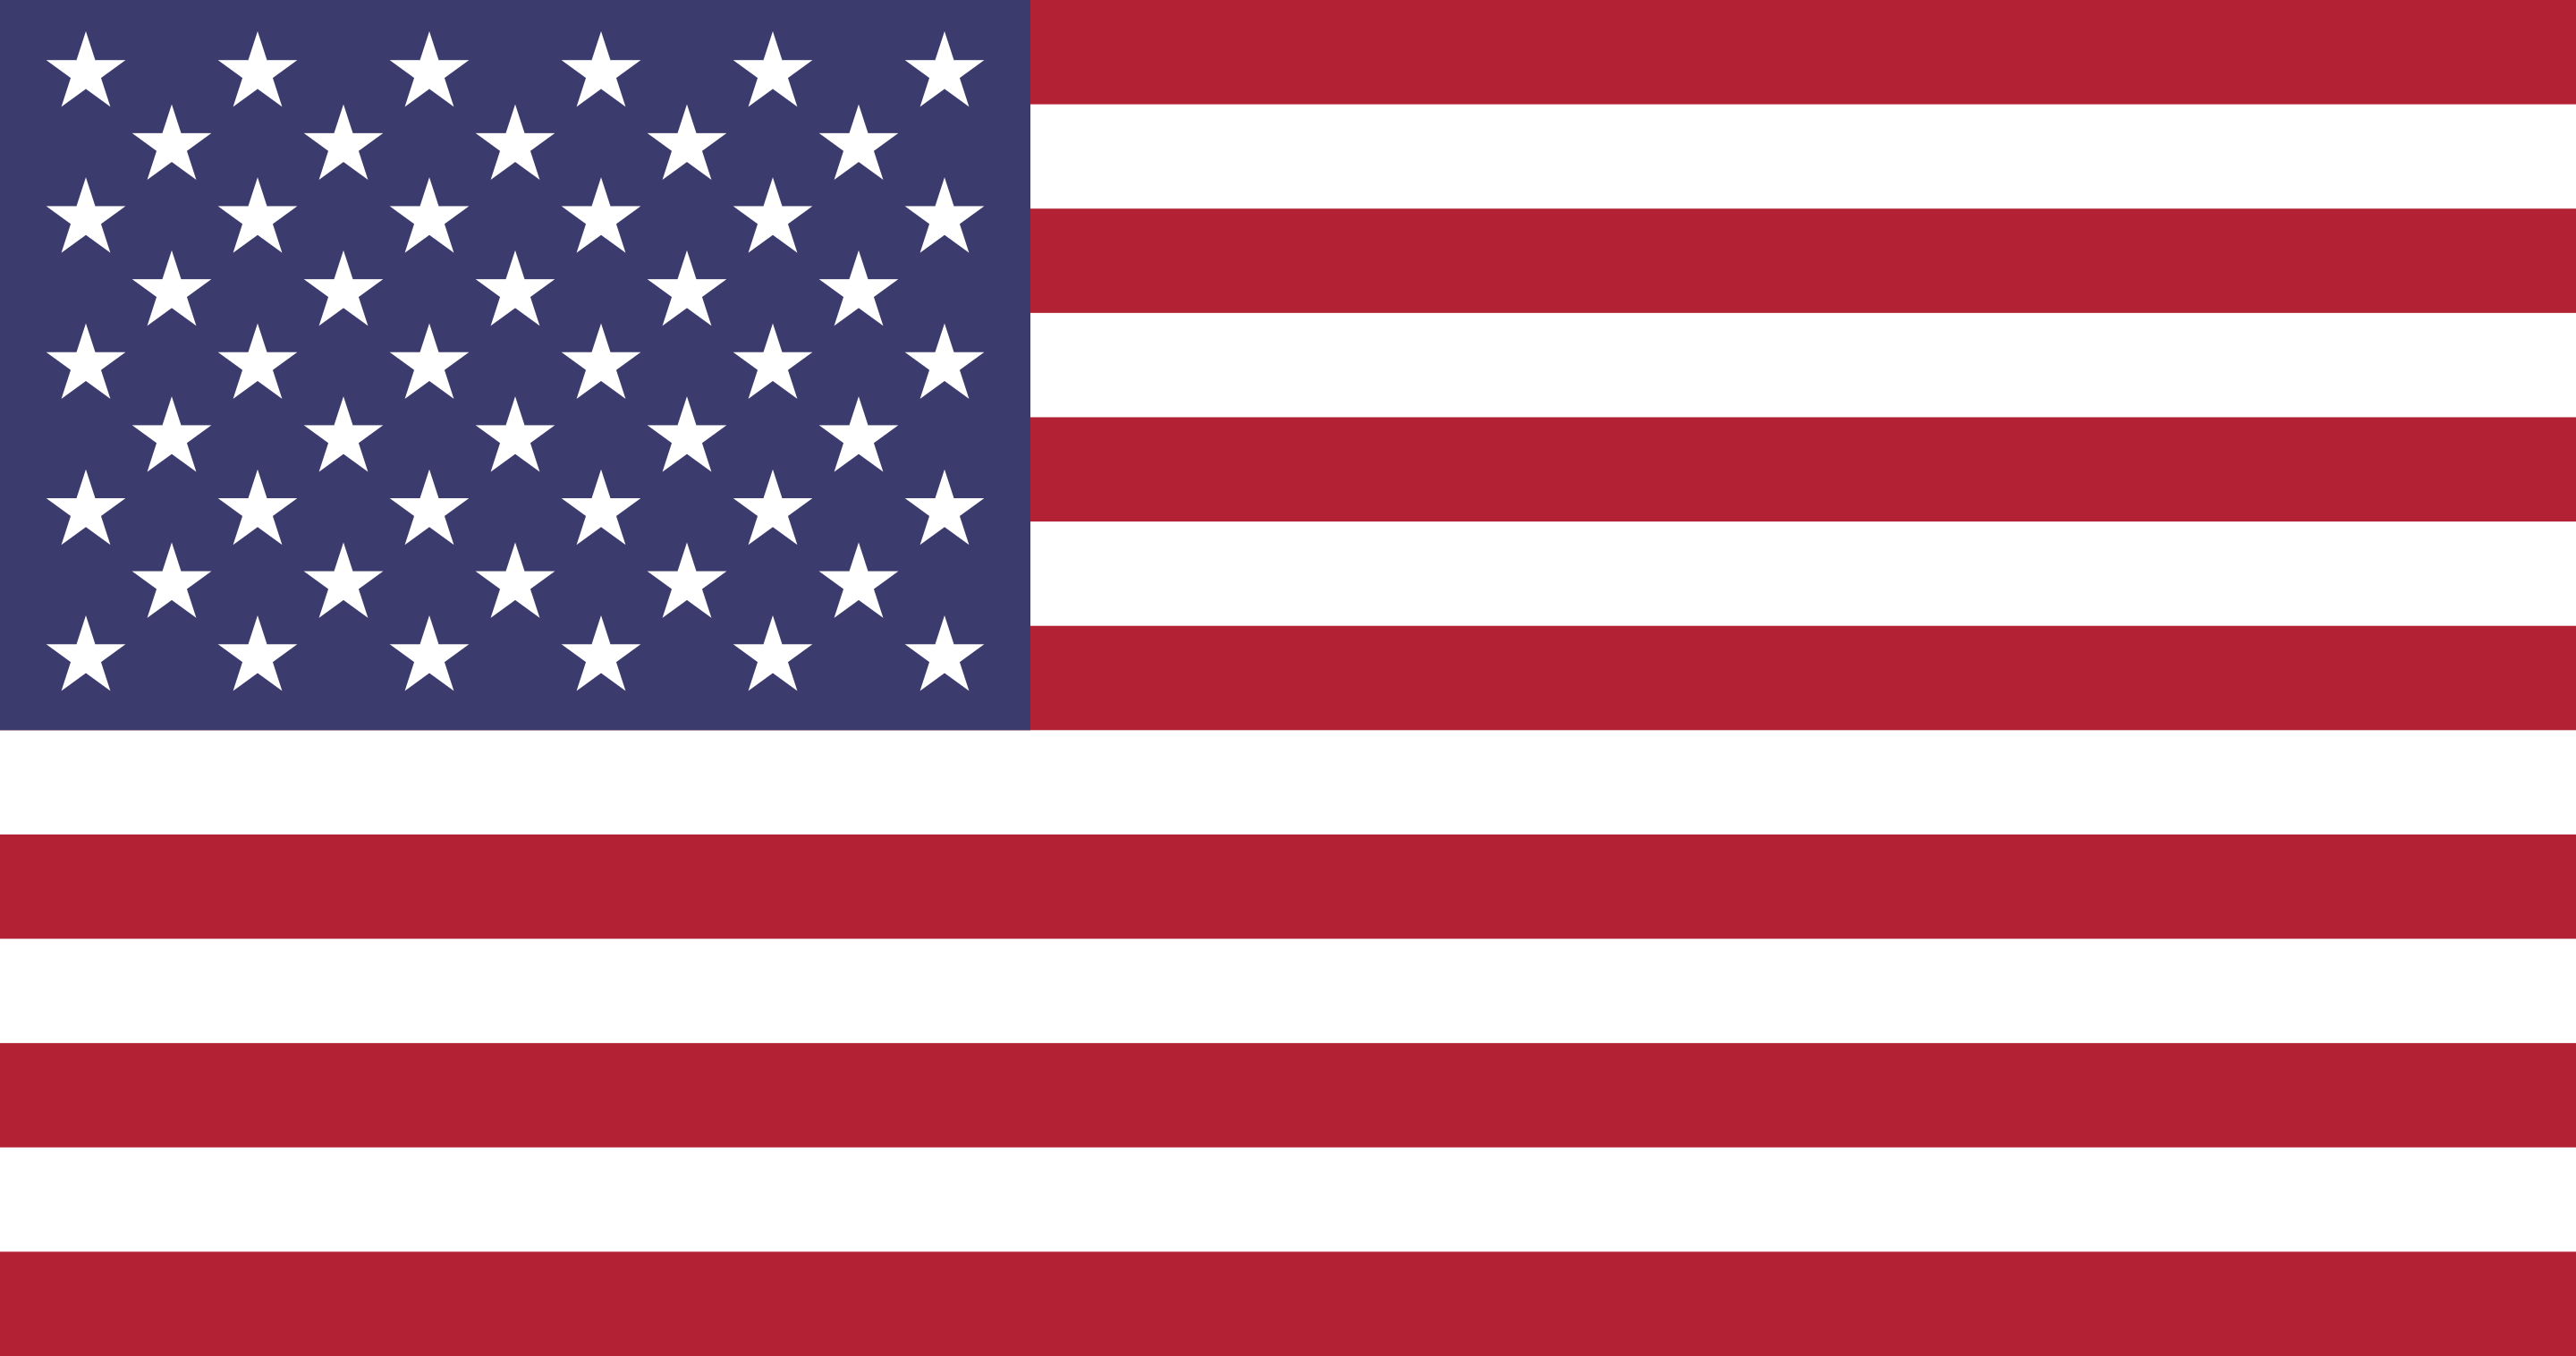 An American flag with microwave radio frequency antennas.